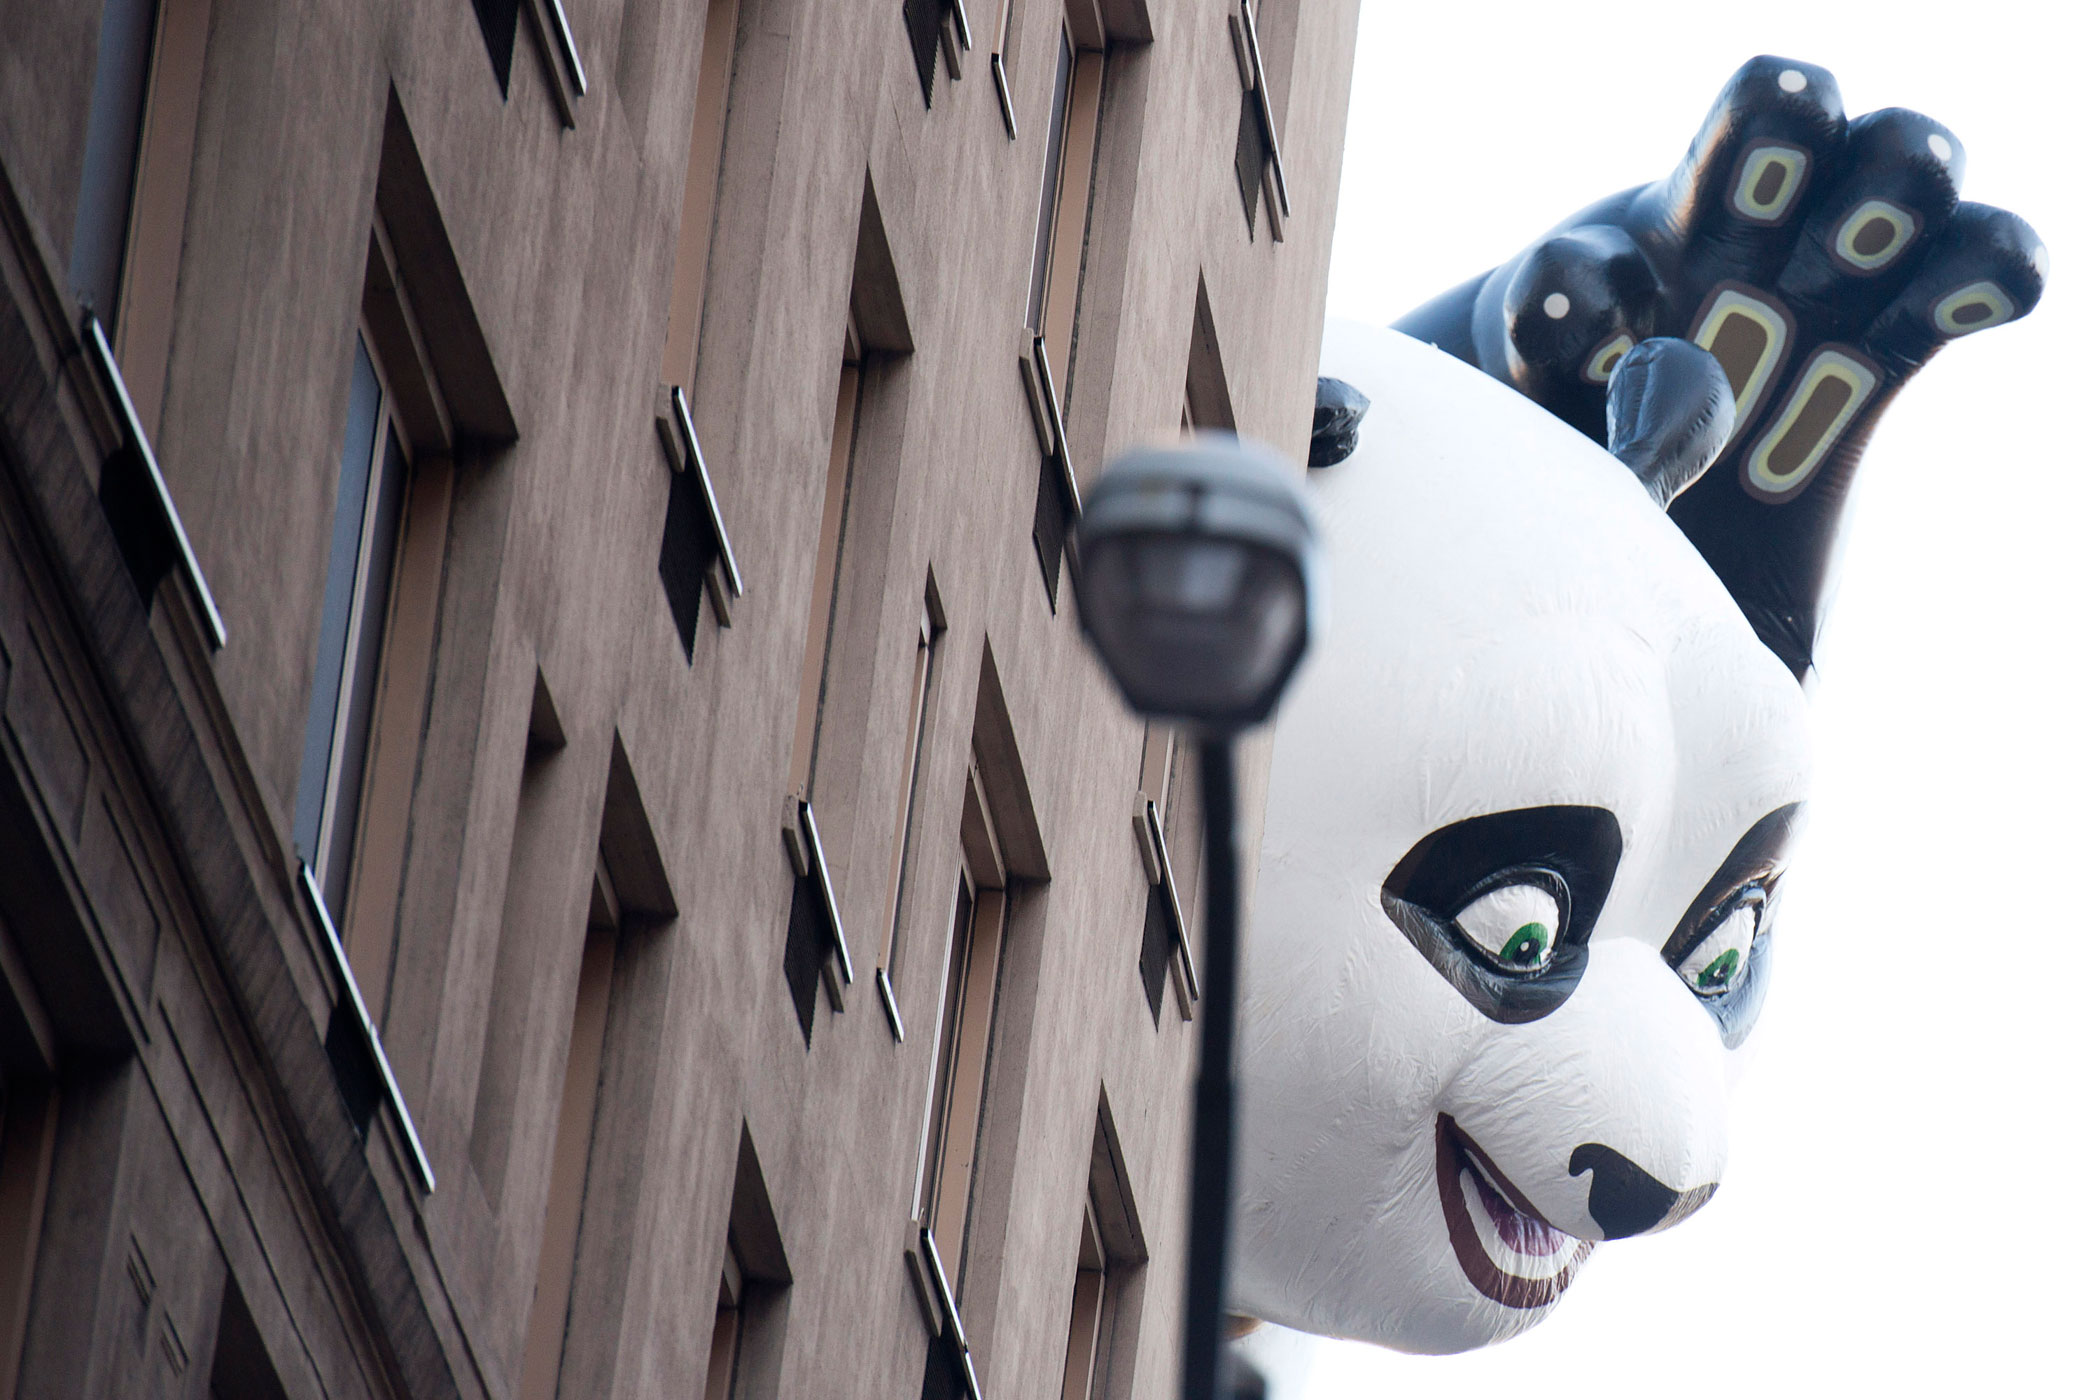 image: Nov. 22, 2012. The Kung Fu Panda balloon floats in the Macy's Thanksgiving Day Parade in New York City.